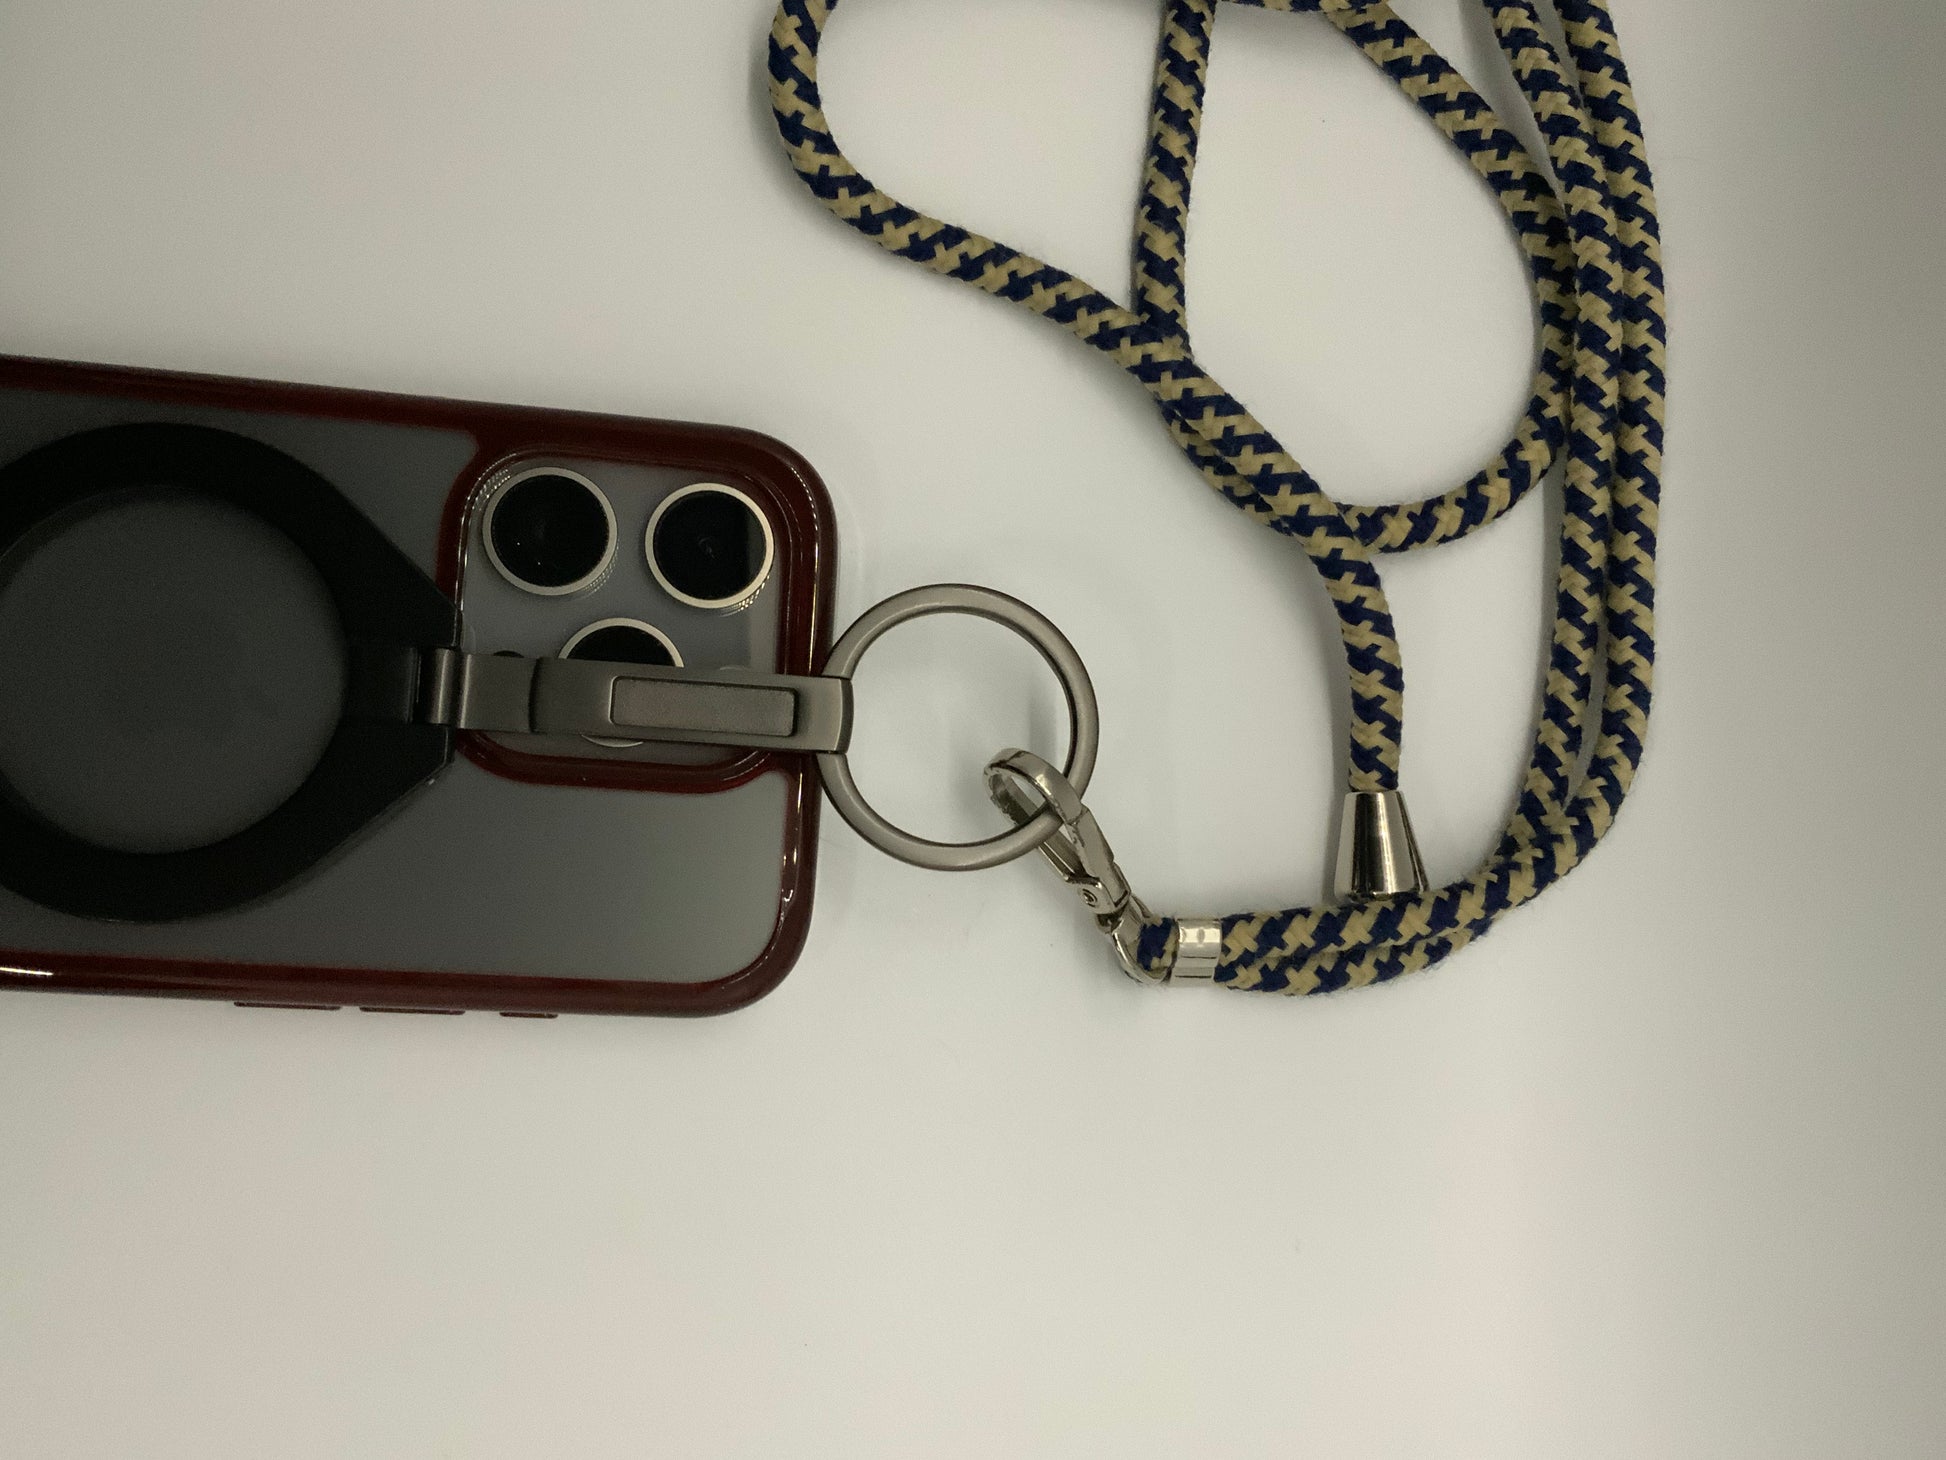 Be My AI: The picture shows a phone case with a strap. The phone case is a deep red color and has a circular cutout on the back, possibly for a logo. There are also three circular cutouts at the top left corner of the case, likely for the camera lenses. Attached to the case is a metal ring with a strap. The strap is made of fabric and has a zigzag pattern in dark blue and beige colors. The strap is looped and appears to be long enough to wear around the neck. There is also a small metal bell attached to the